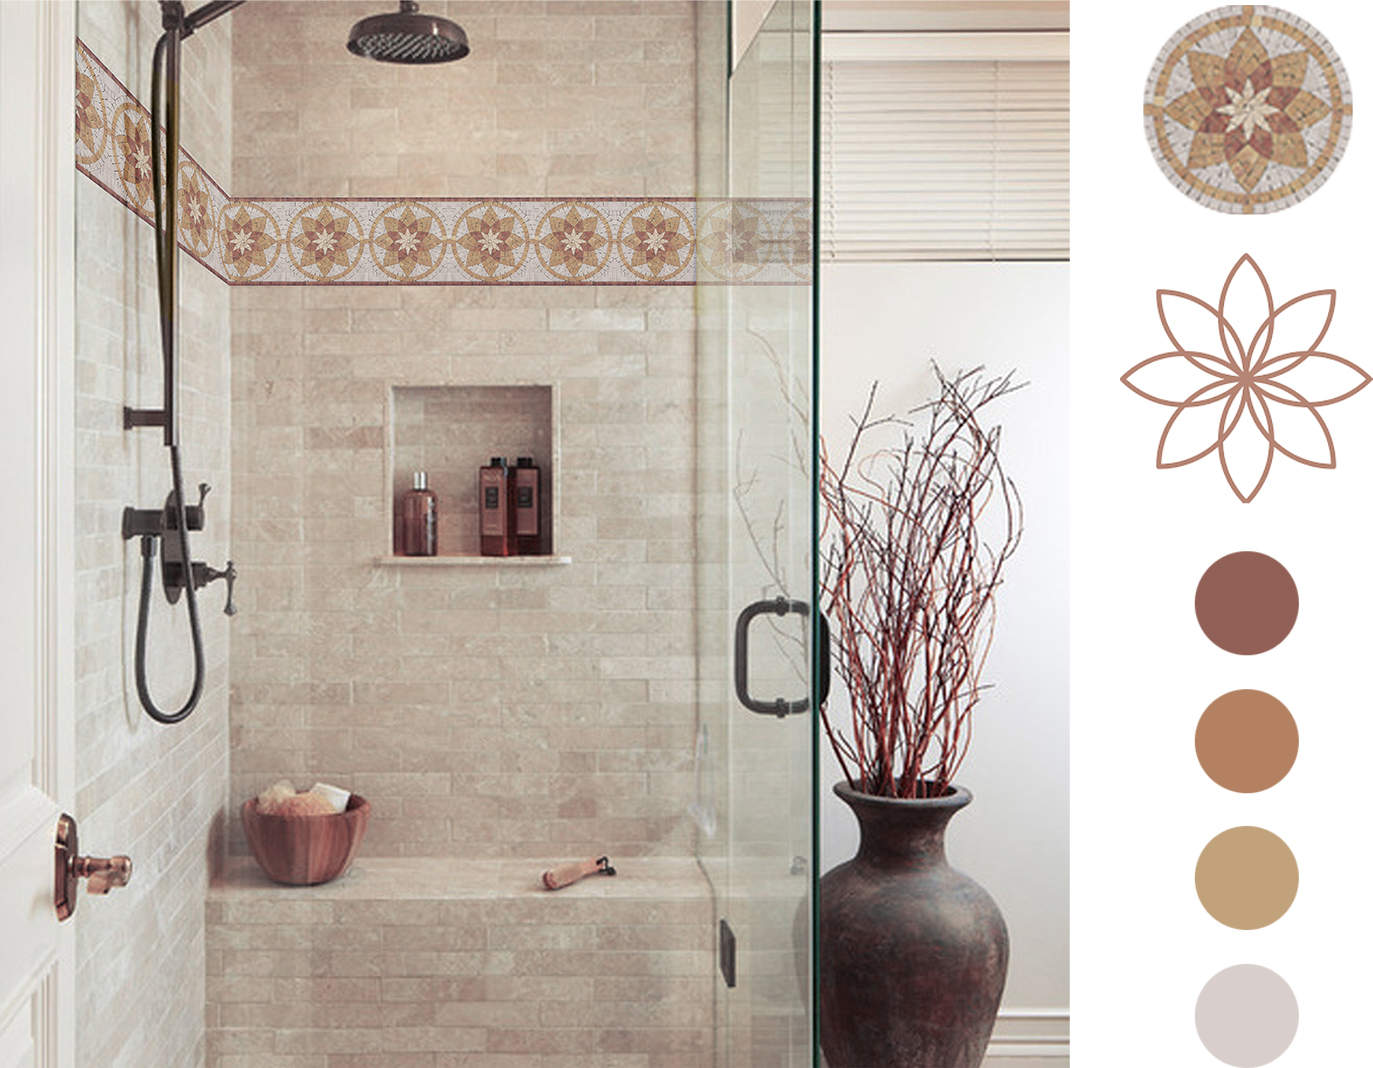 The crema marfil tiles serve as an elegant backdrop, seamlessly complementing the mosaic tile border